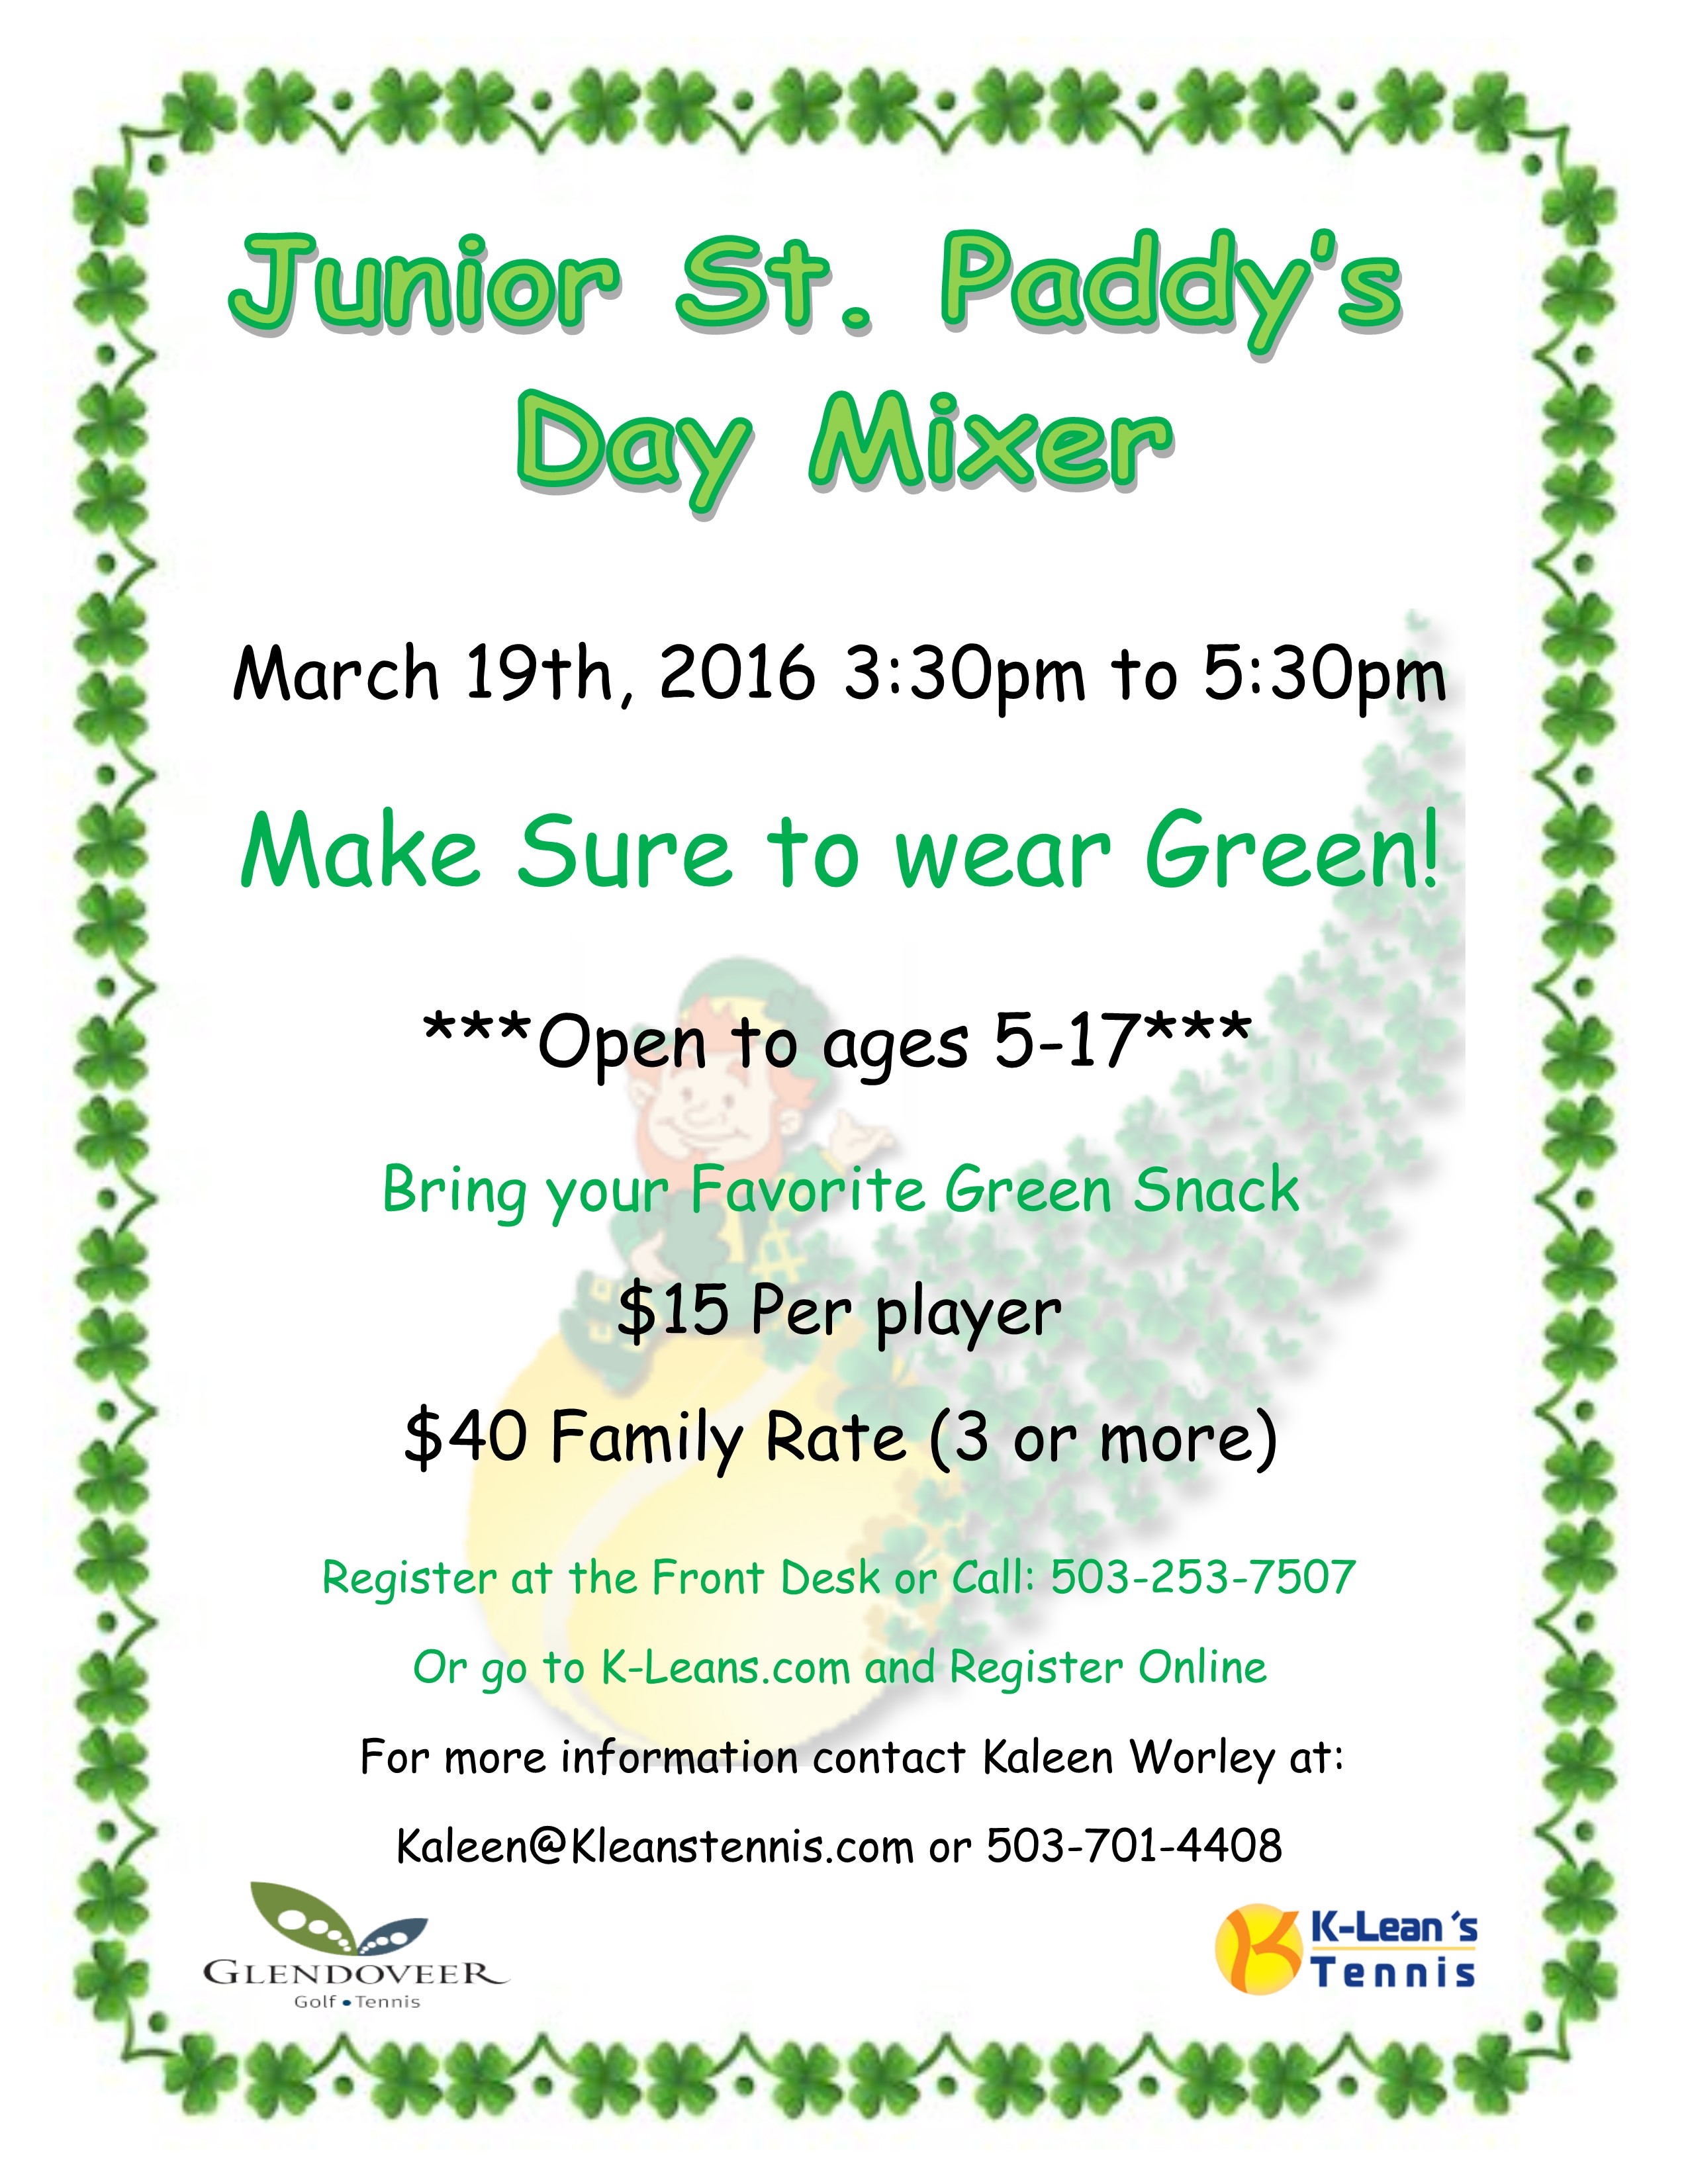 St. Paddys Day Mixer